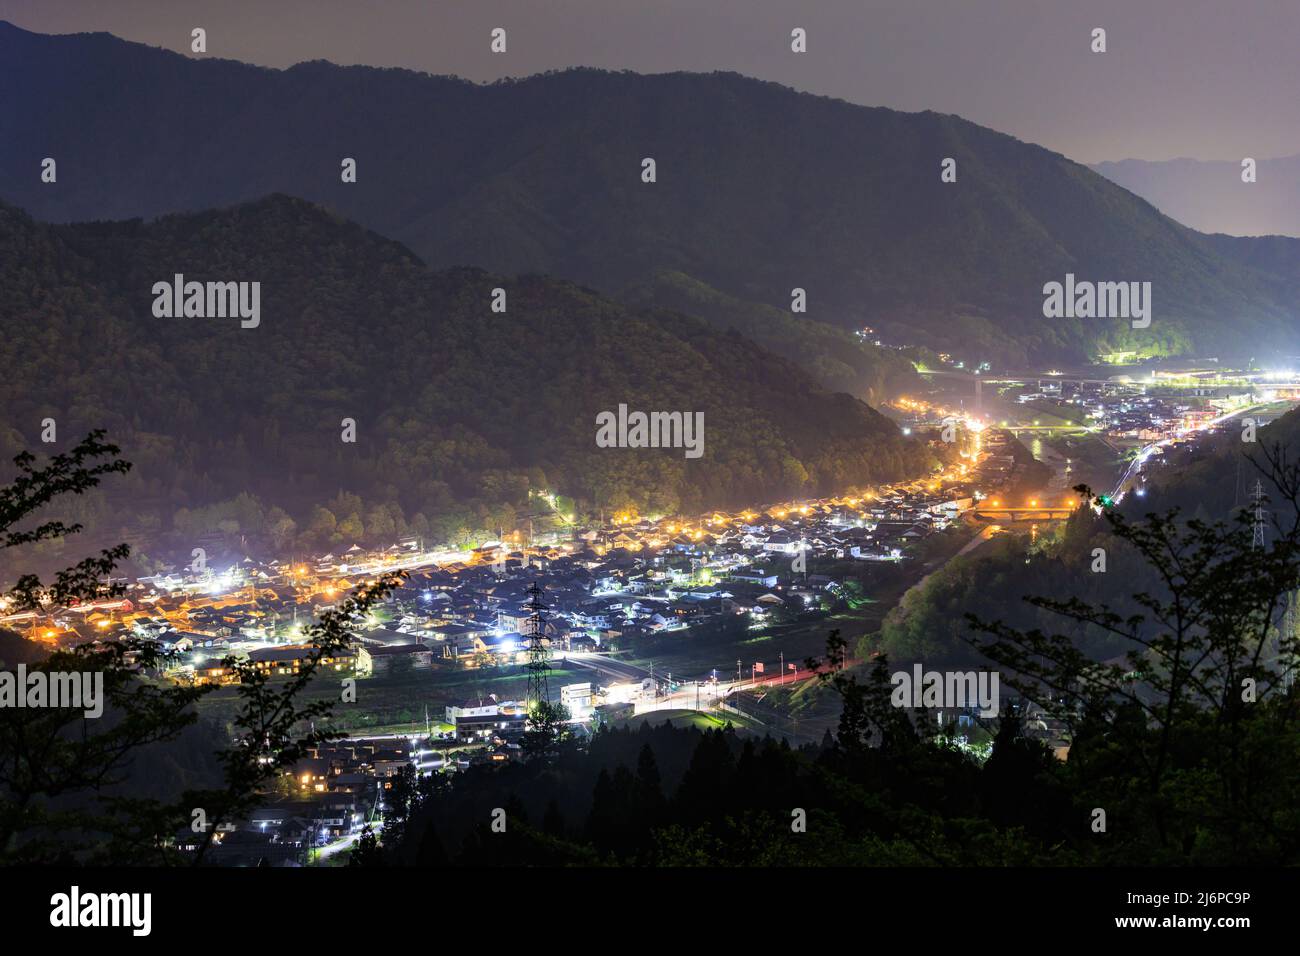 Small village lit up between dark mountains at night Stock Photo